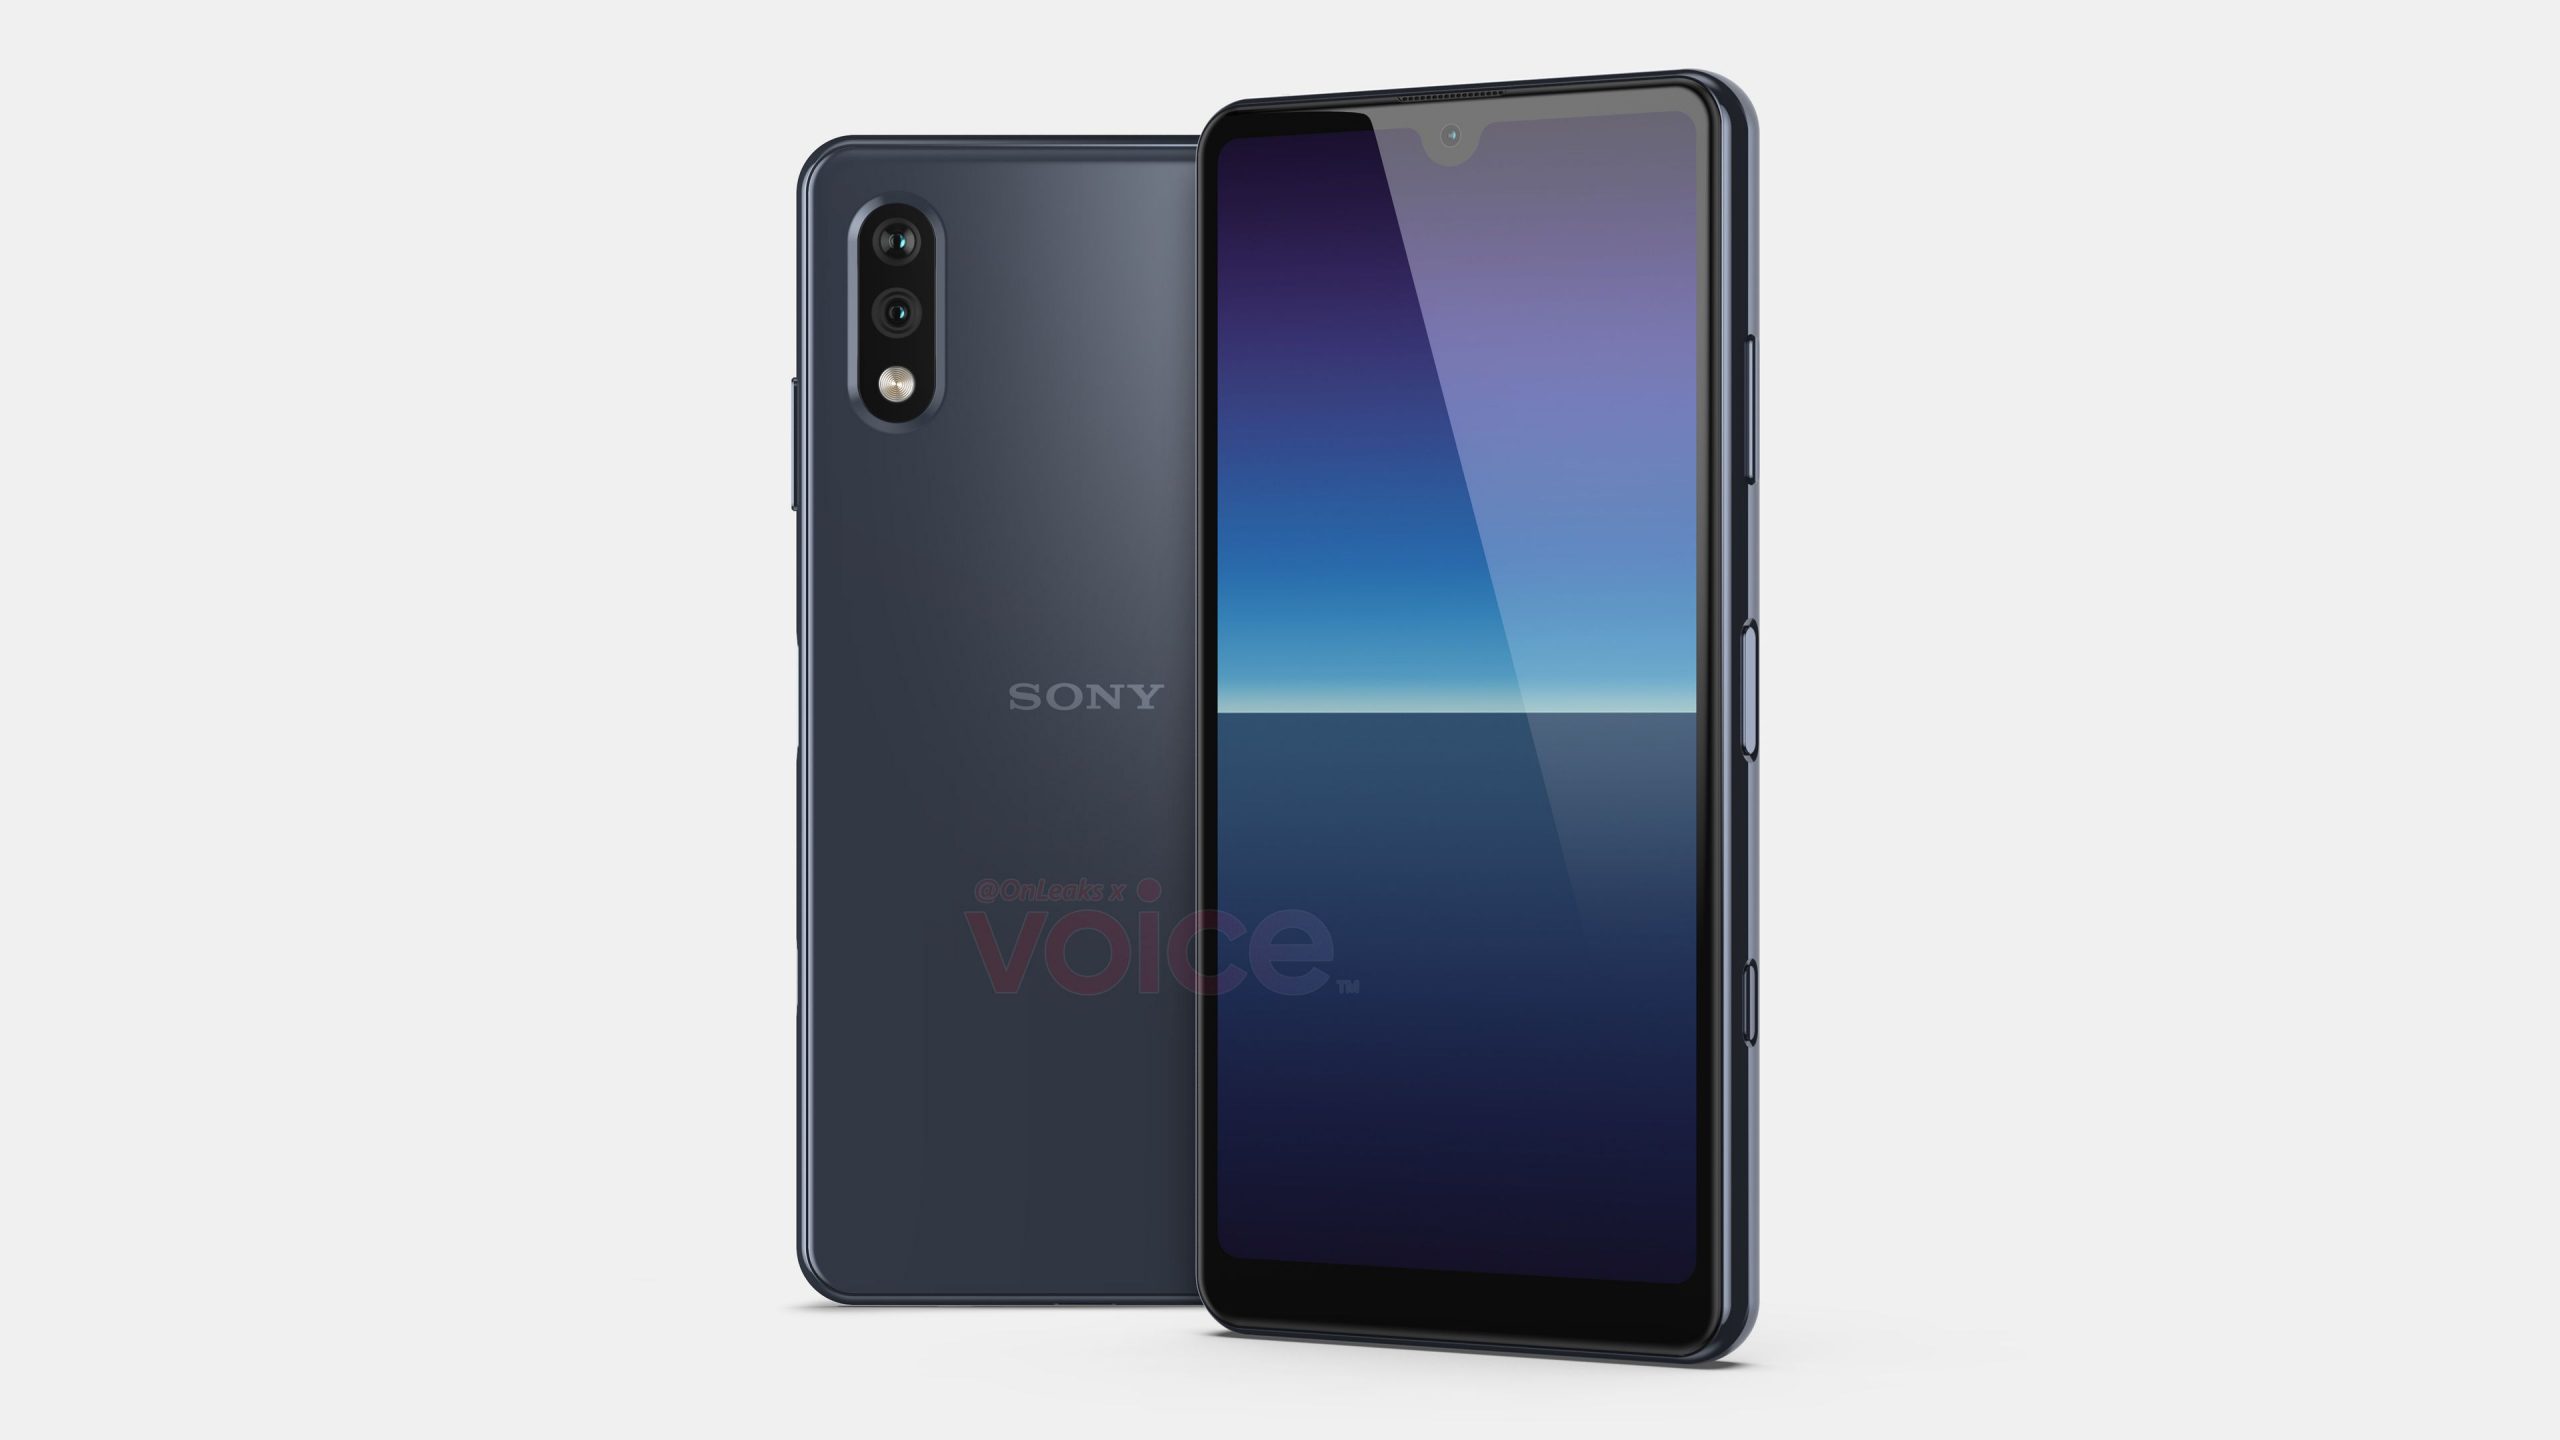 Renders give us our first look at the 2021 Sony Xperia Compact